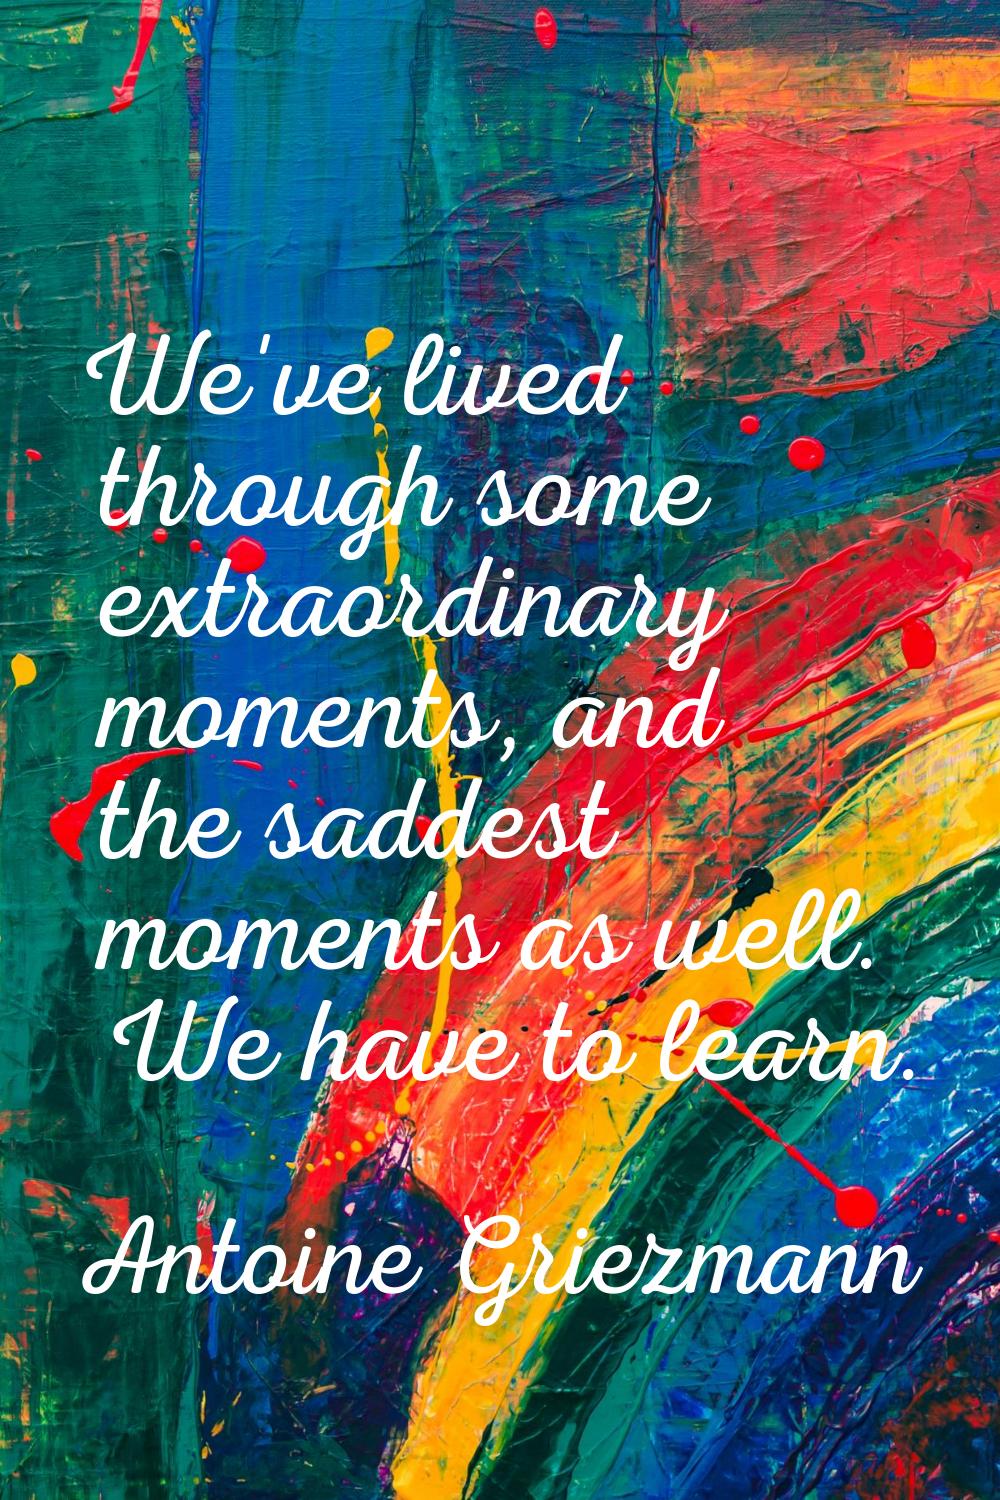 We've lived through some extraordinary moments, and the saddest moments as well. We have to learn.